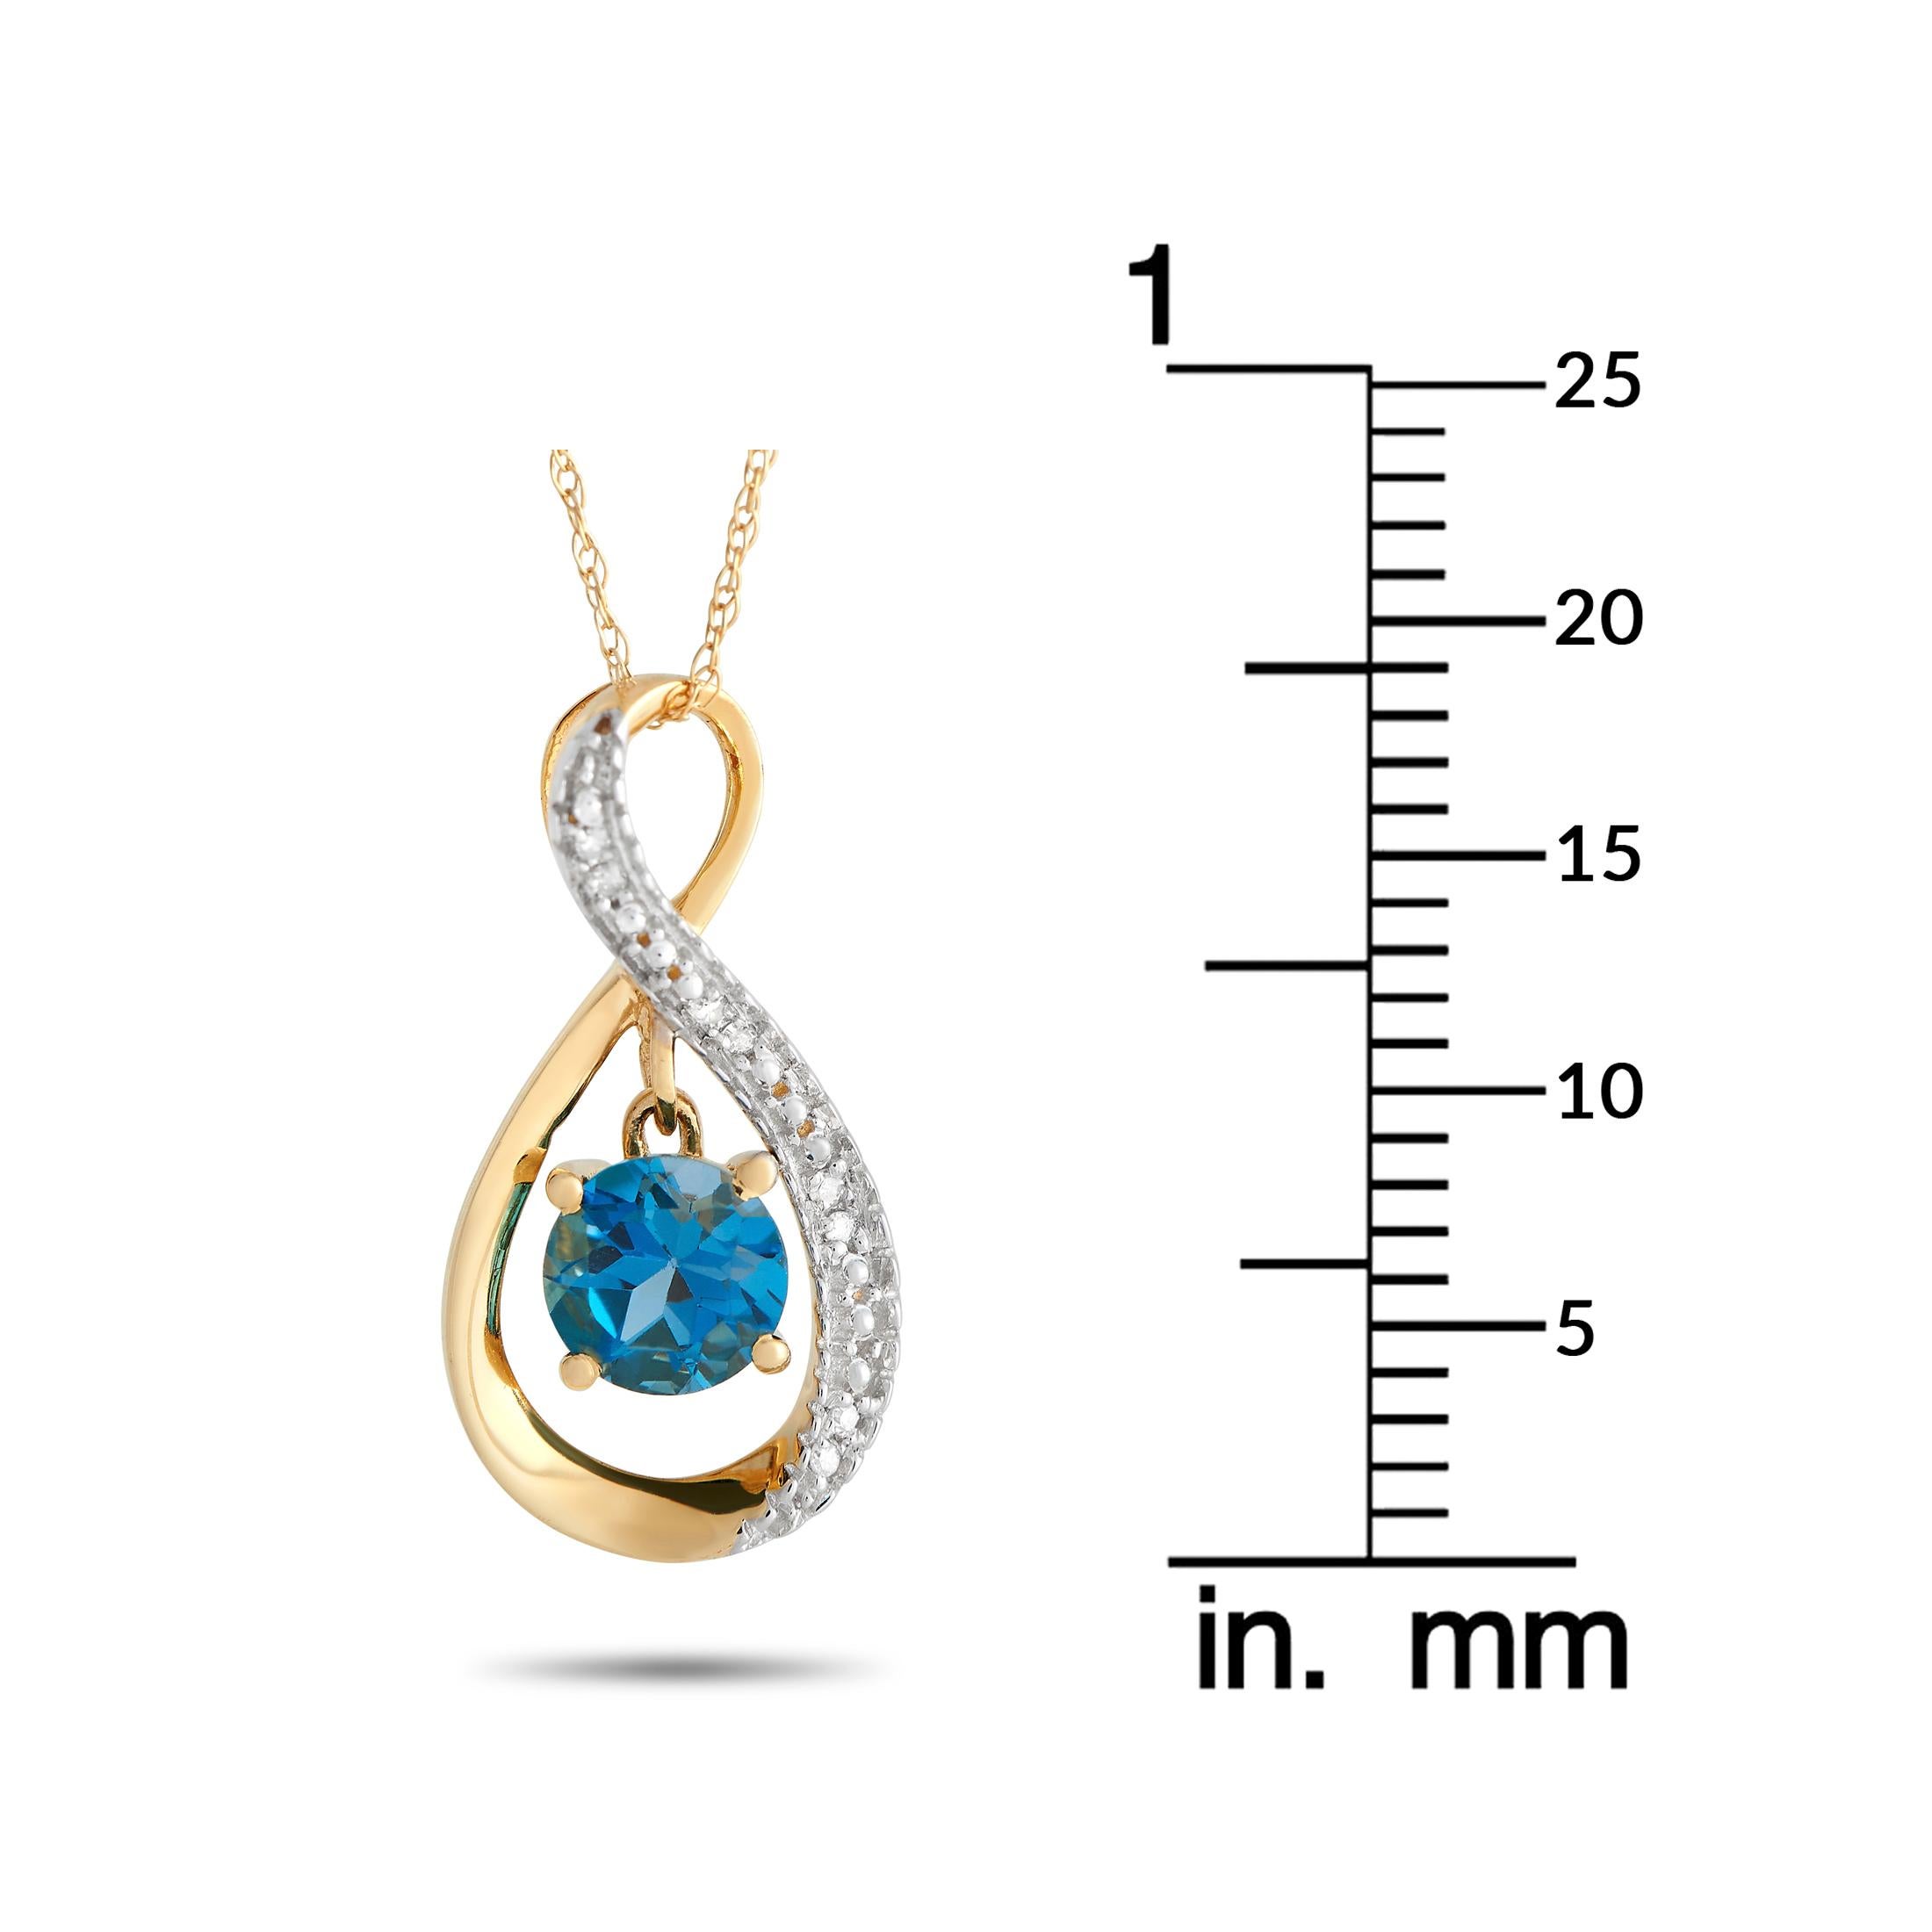 LB Exclusive 14K Yellow Gold 0.03 ct Diamond and Topaz Necklace In New Condition For Sale In Southampton, PA